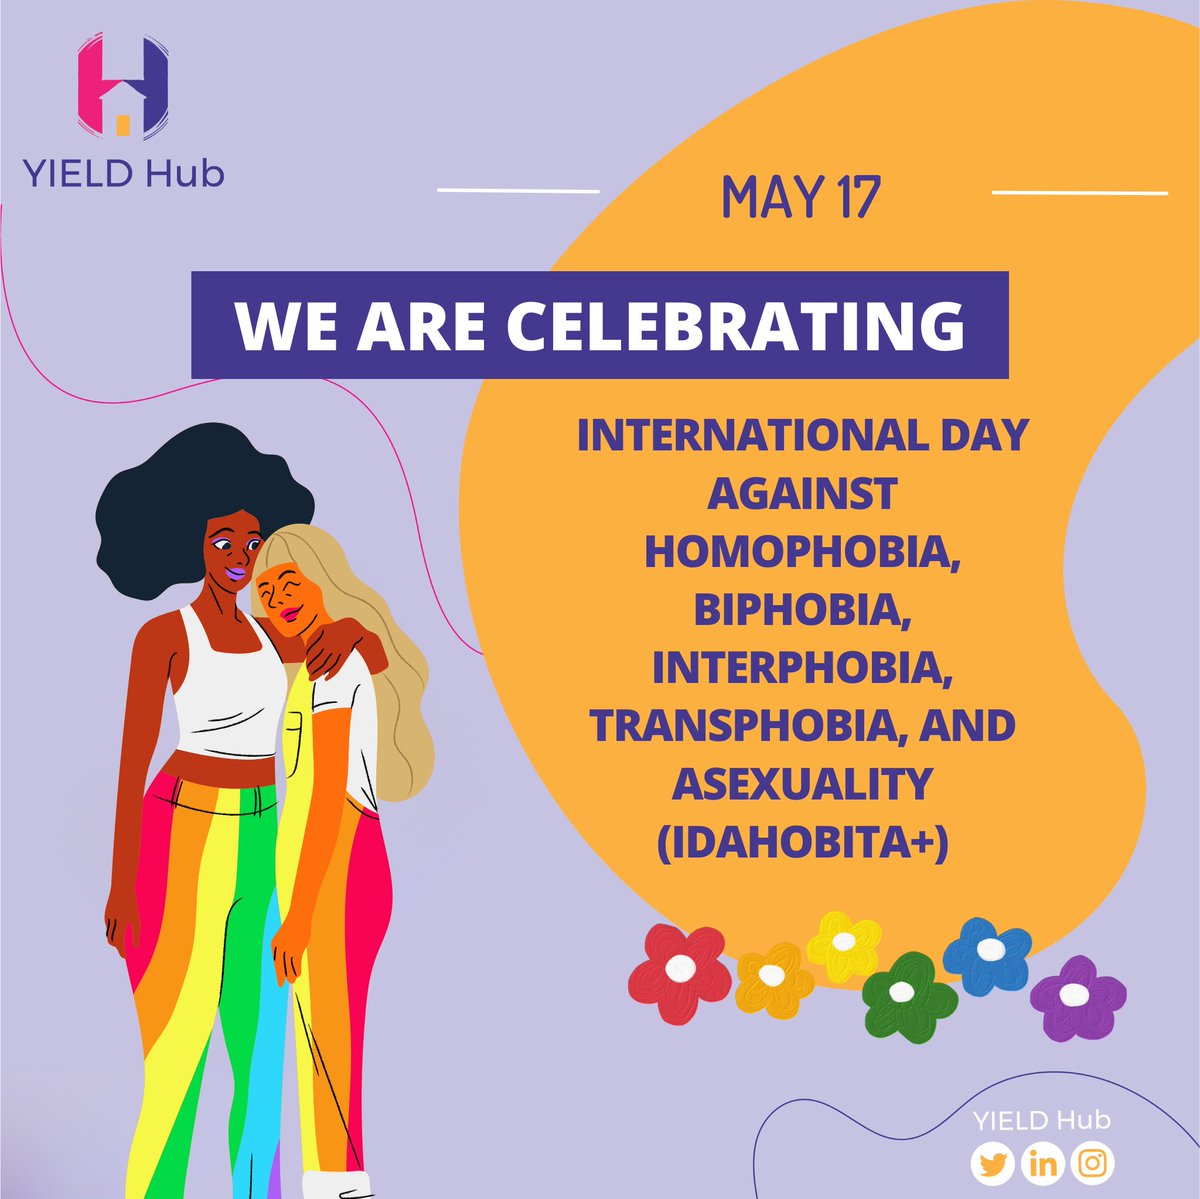 Today is International Day against Homophobia, Biphobia, Interphobia, Transphobia, and Asexuality (IDAHOBITA+). At @Hub_YIELD, we champion a world where everyone is valued and respected. Let’s foster an inclusive community for all 🏳️‍🌈🏳️‍⚧️ #IDAHOBIT #idahobita #inclusion